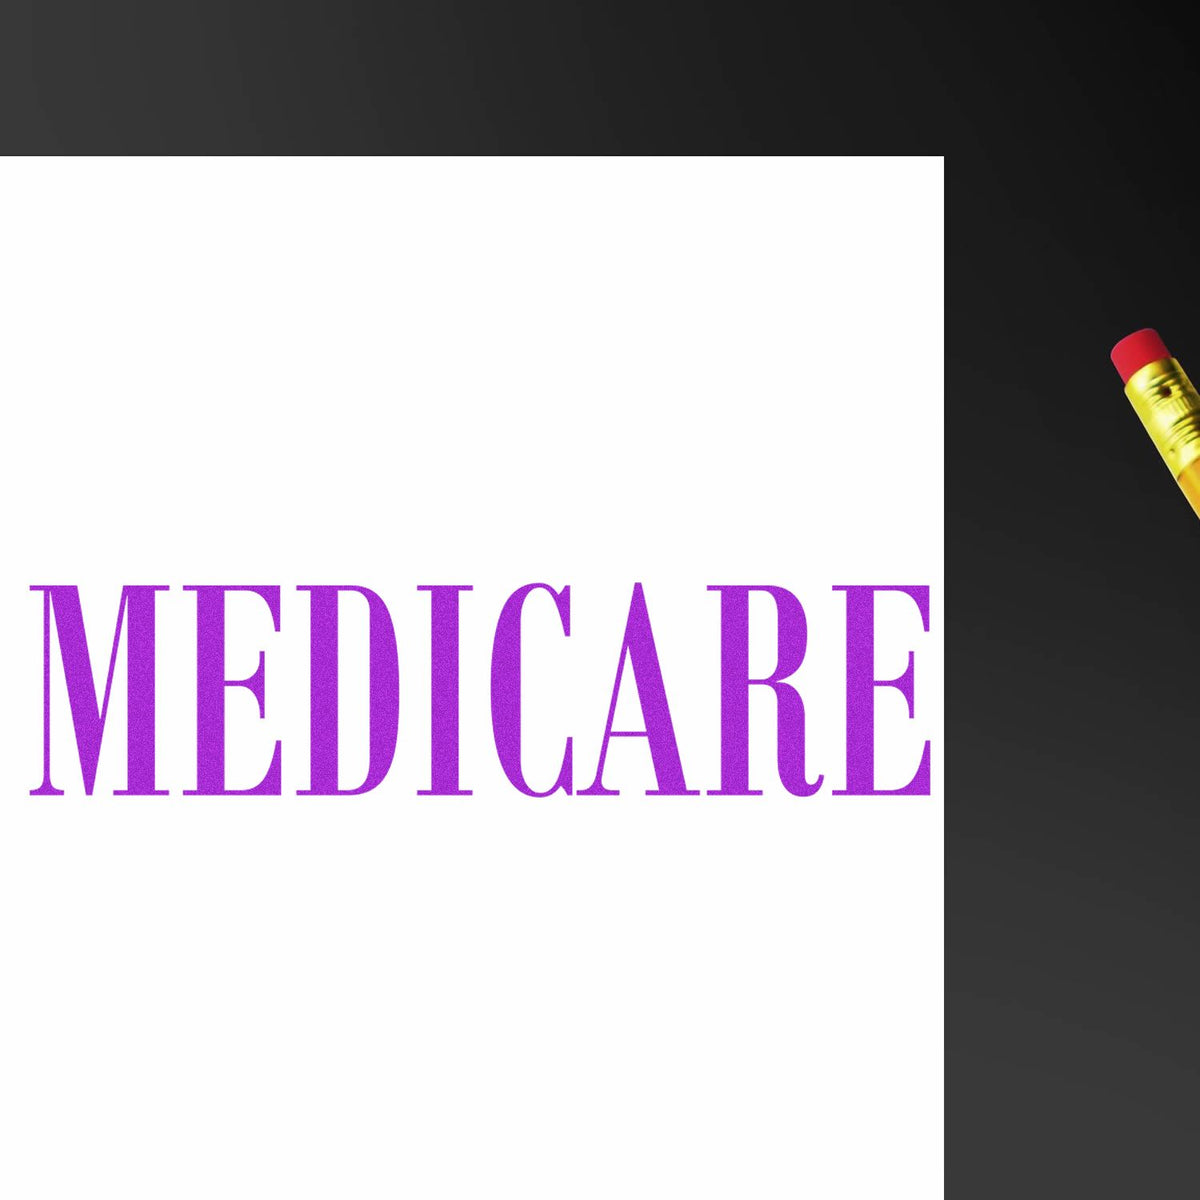 Large Medicare Rubber Stamp In Use